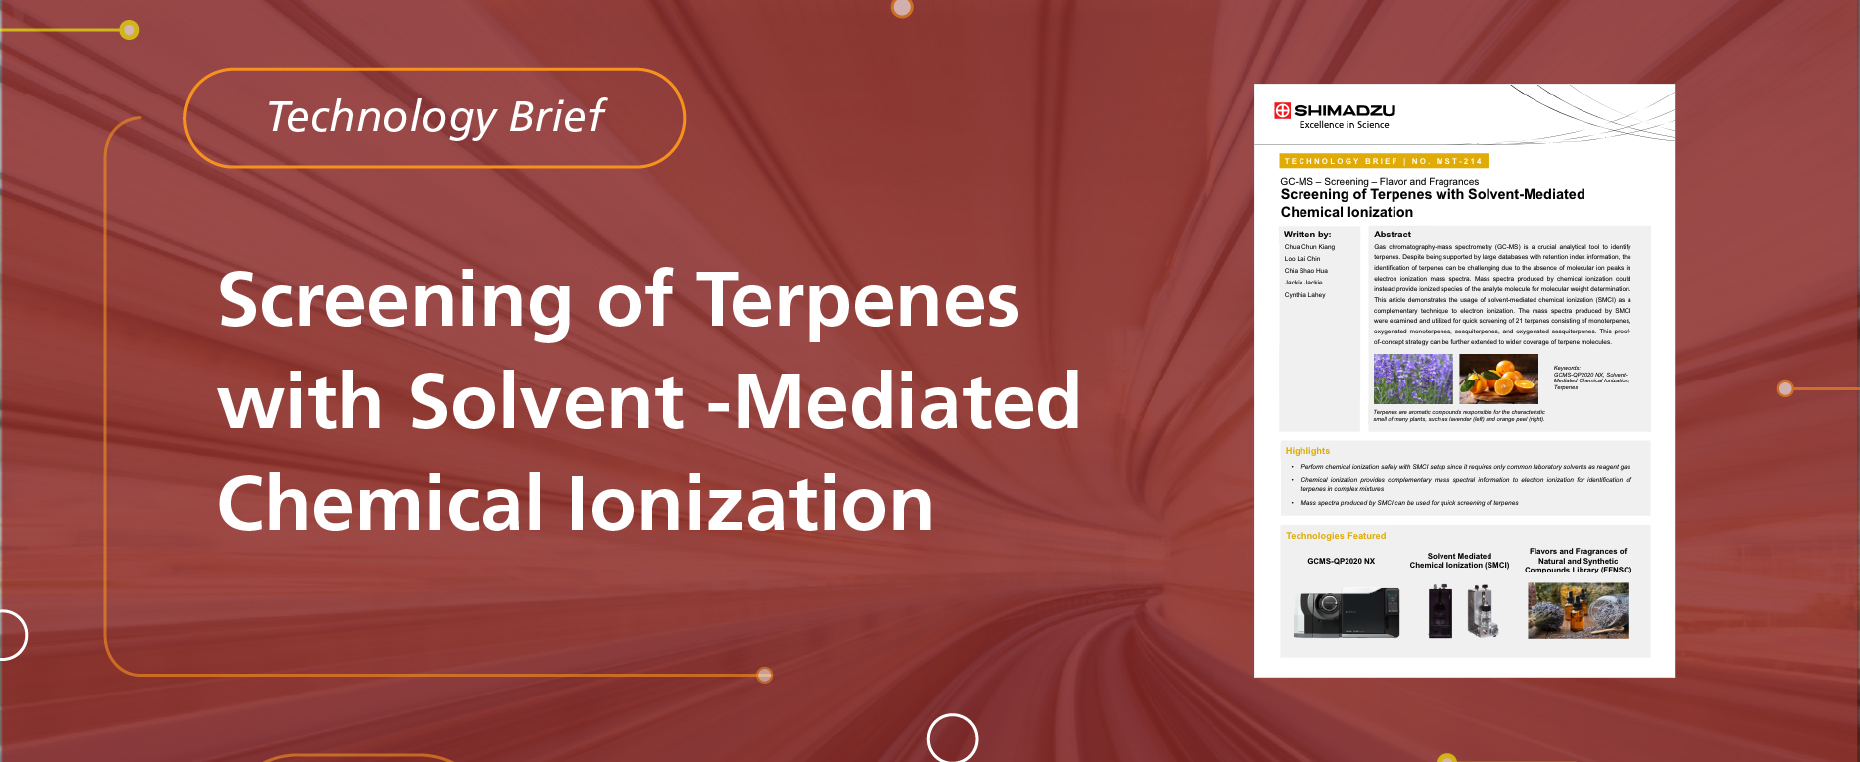 Screening of Terpenes with Solvent-Mediated Chemical Ionization